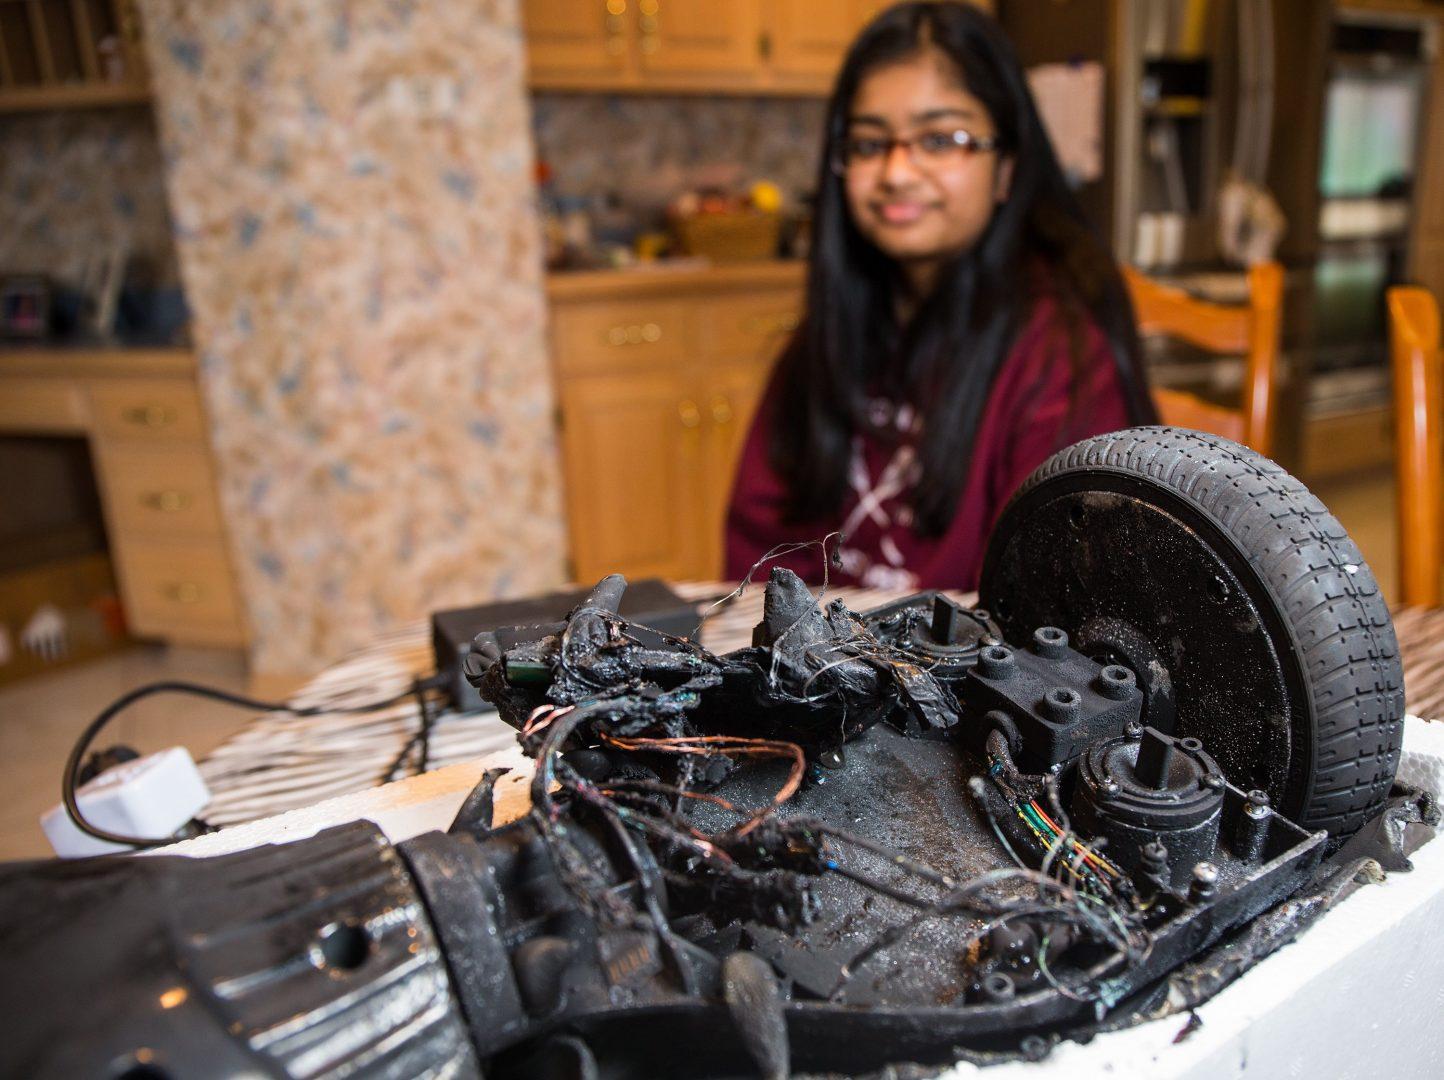 Shanna Abraham, 13, with remains of her hoverboard at home in Orland Park, Ill., on Monday, Feb. 15, 2016. The hoverboard exploded over the weekend while charging, causing minor damage to her familys home. (Zbigniew Bzdak/Chicago Tribune/TNS)